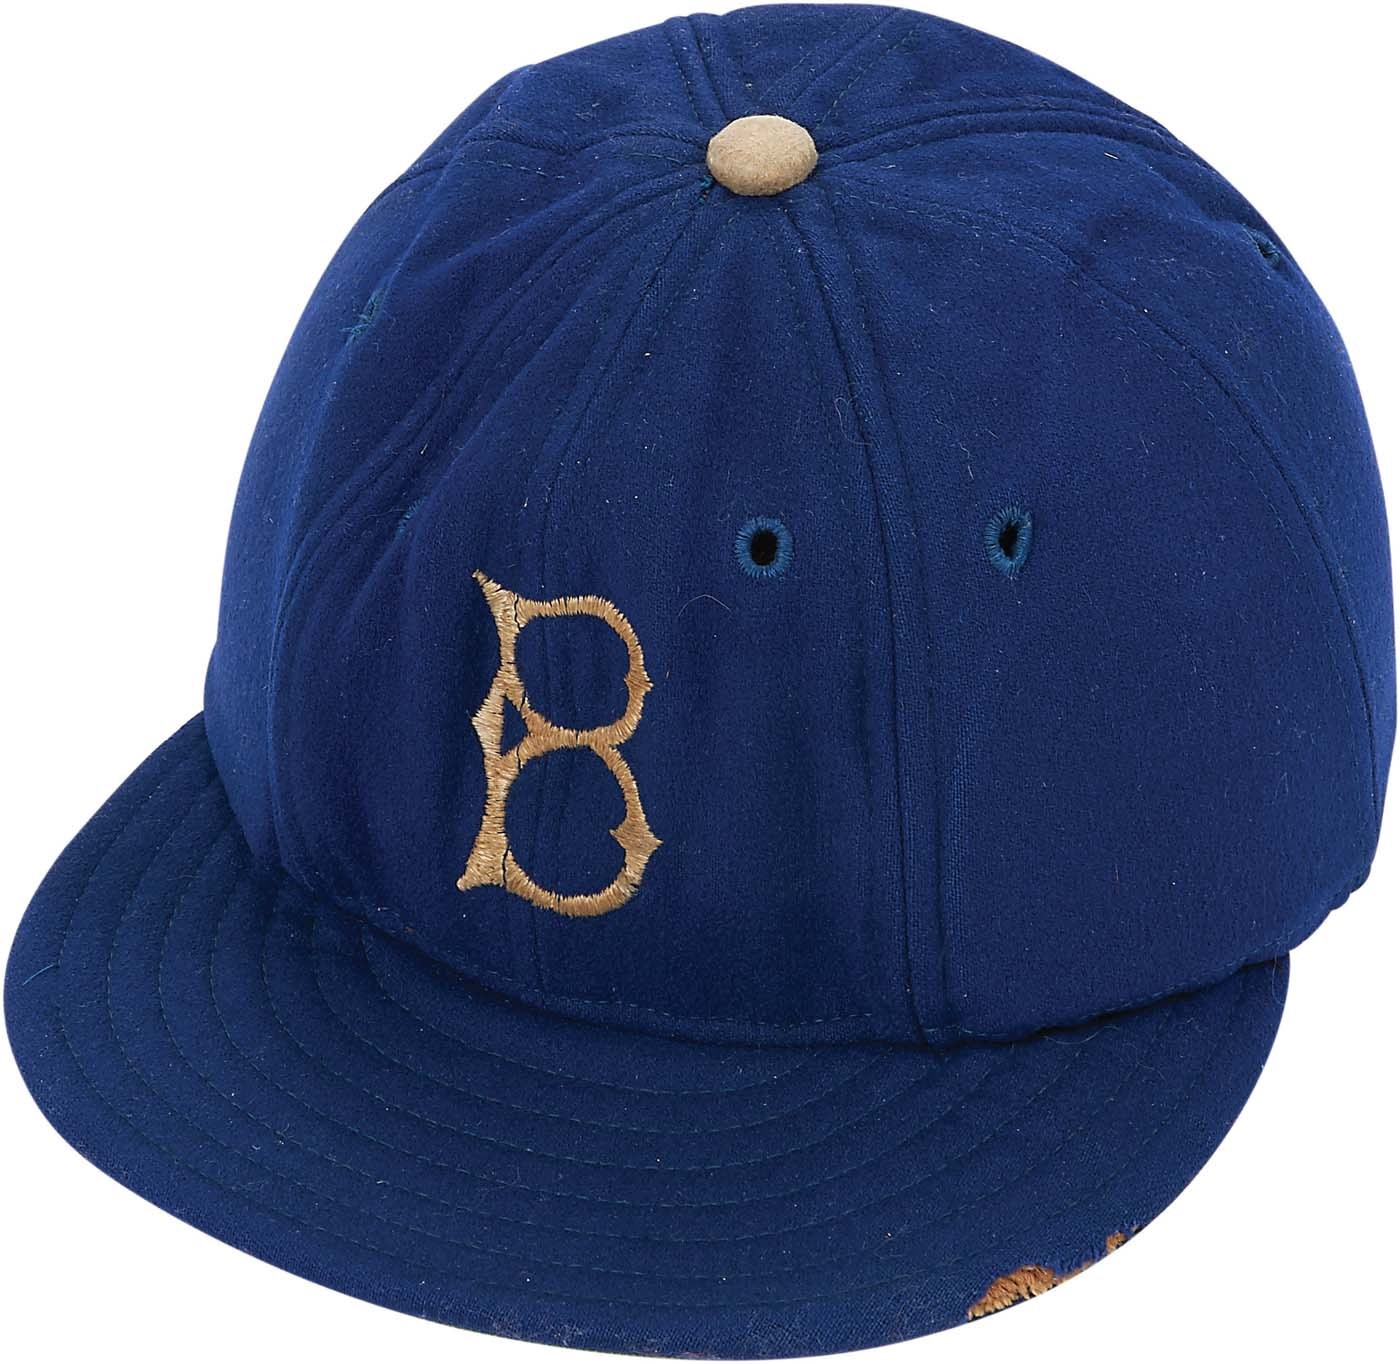 - 1947 Jackie Robinson Rookie Year Cap - Used To Fend Off Racially Motivated Beanballs (Rachel Robinson Letter)